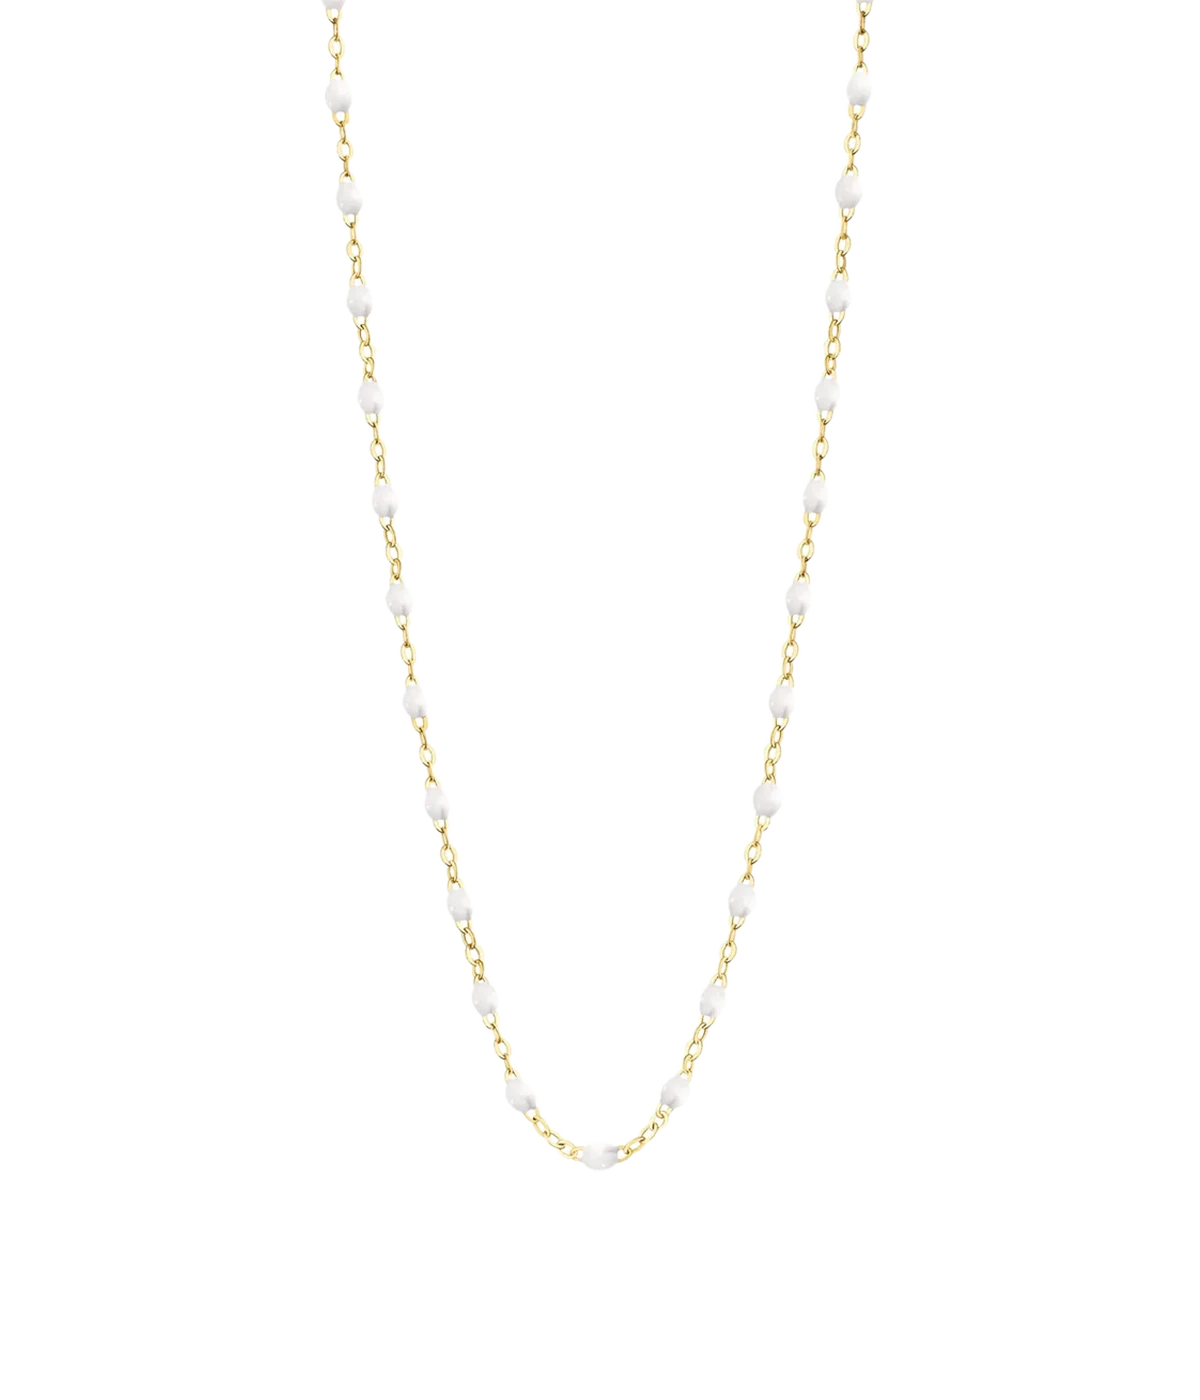 Classic Gigi 45cm Necklace in 18K Yellow Gold & White